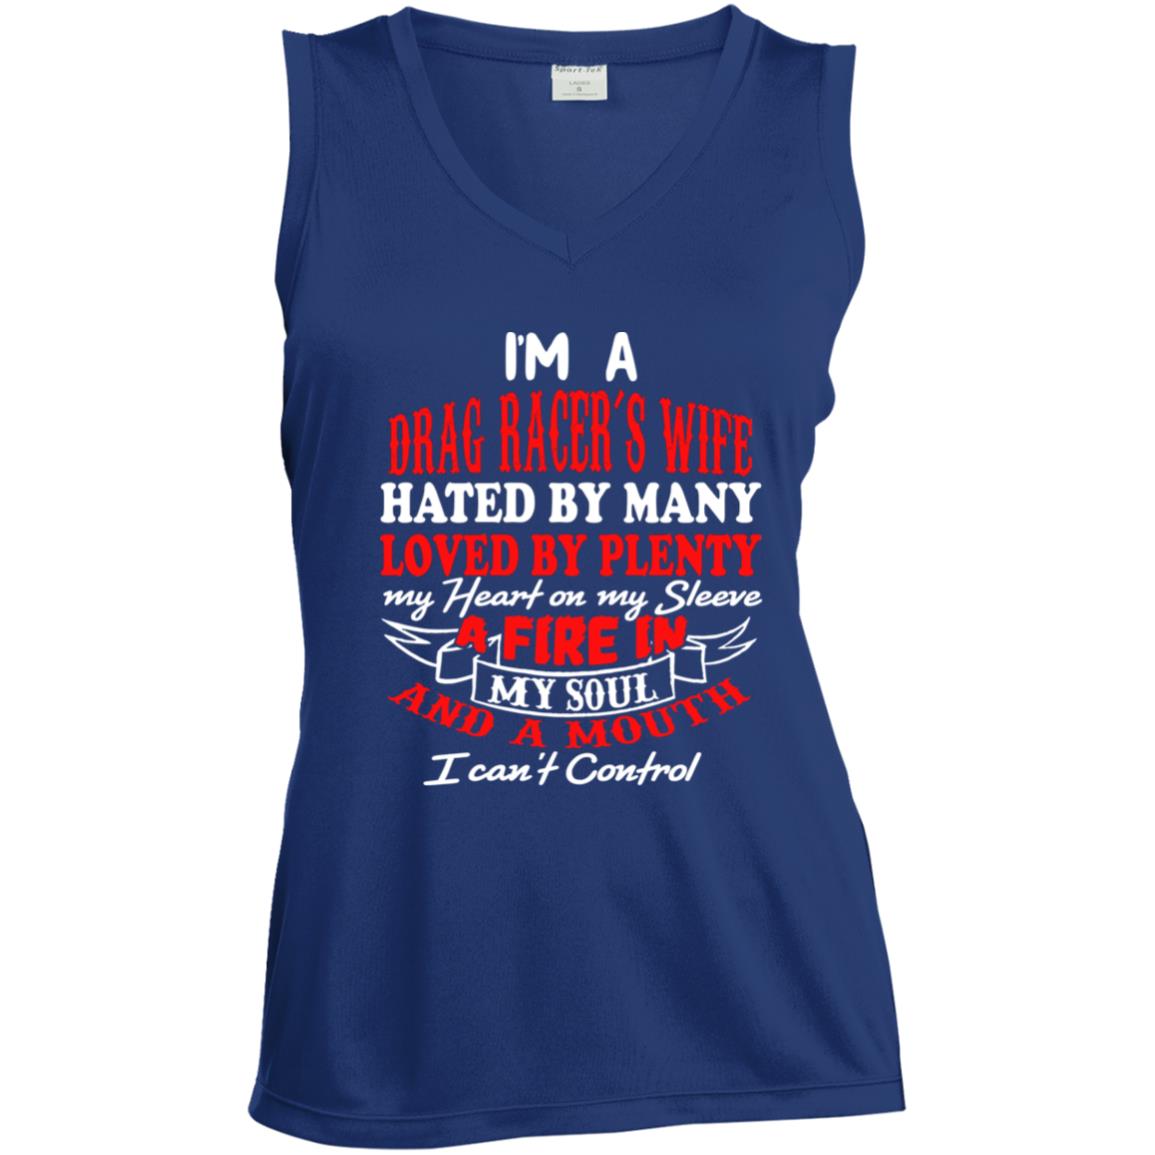 I'm A Drag Racer's Wife Hated By Many Loved By Plenty Ladies' Sleeveless V-Neck Performance Tee